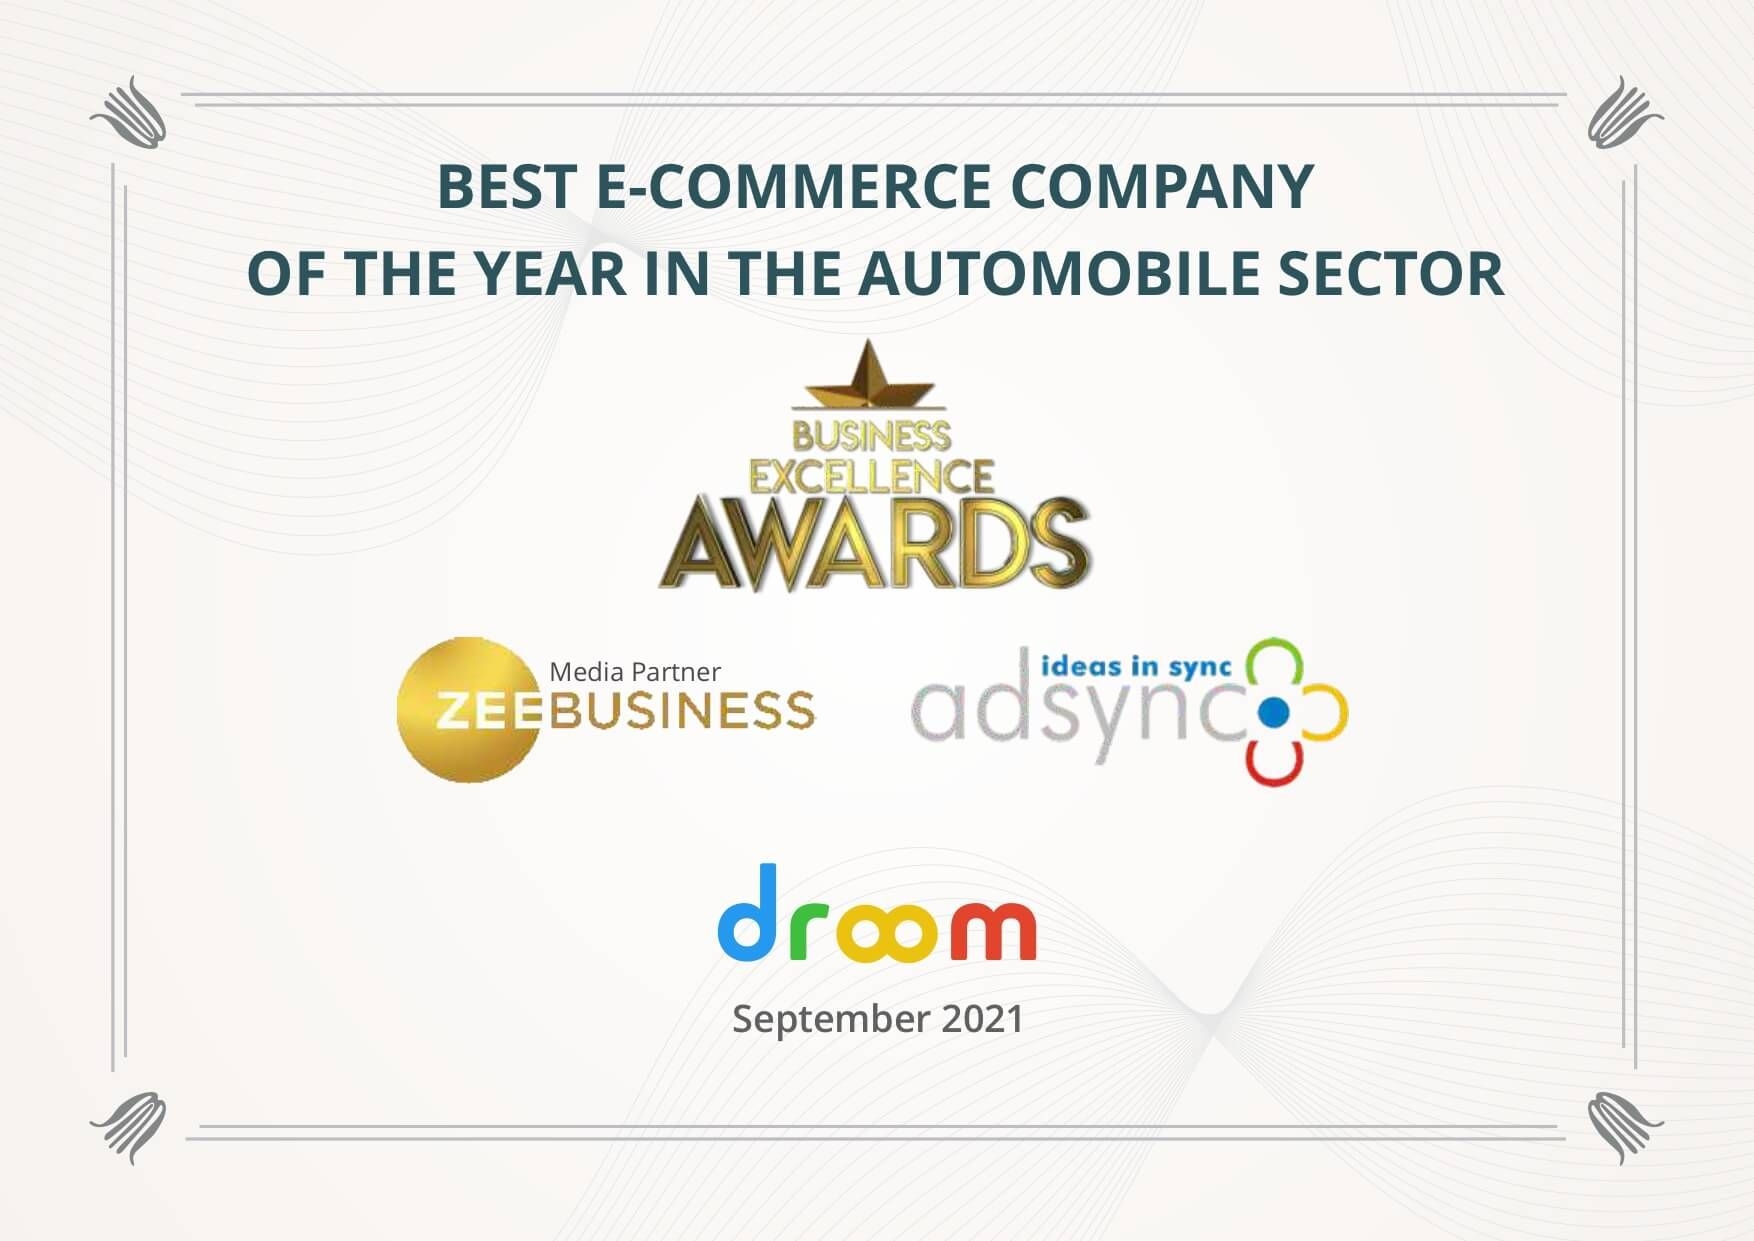 Droom amongst the Best E-commerce Company of the Year